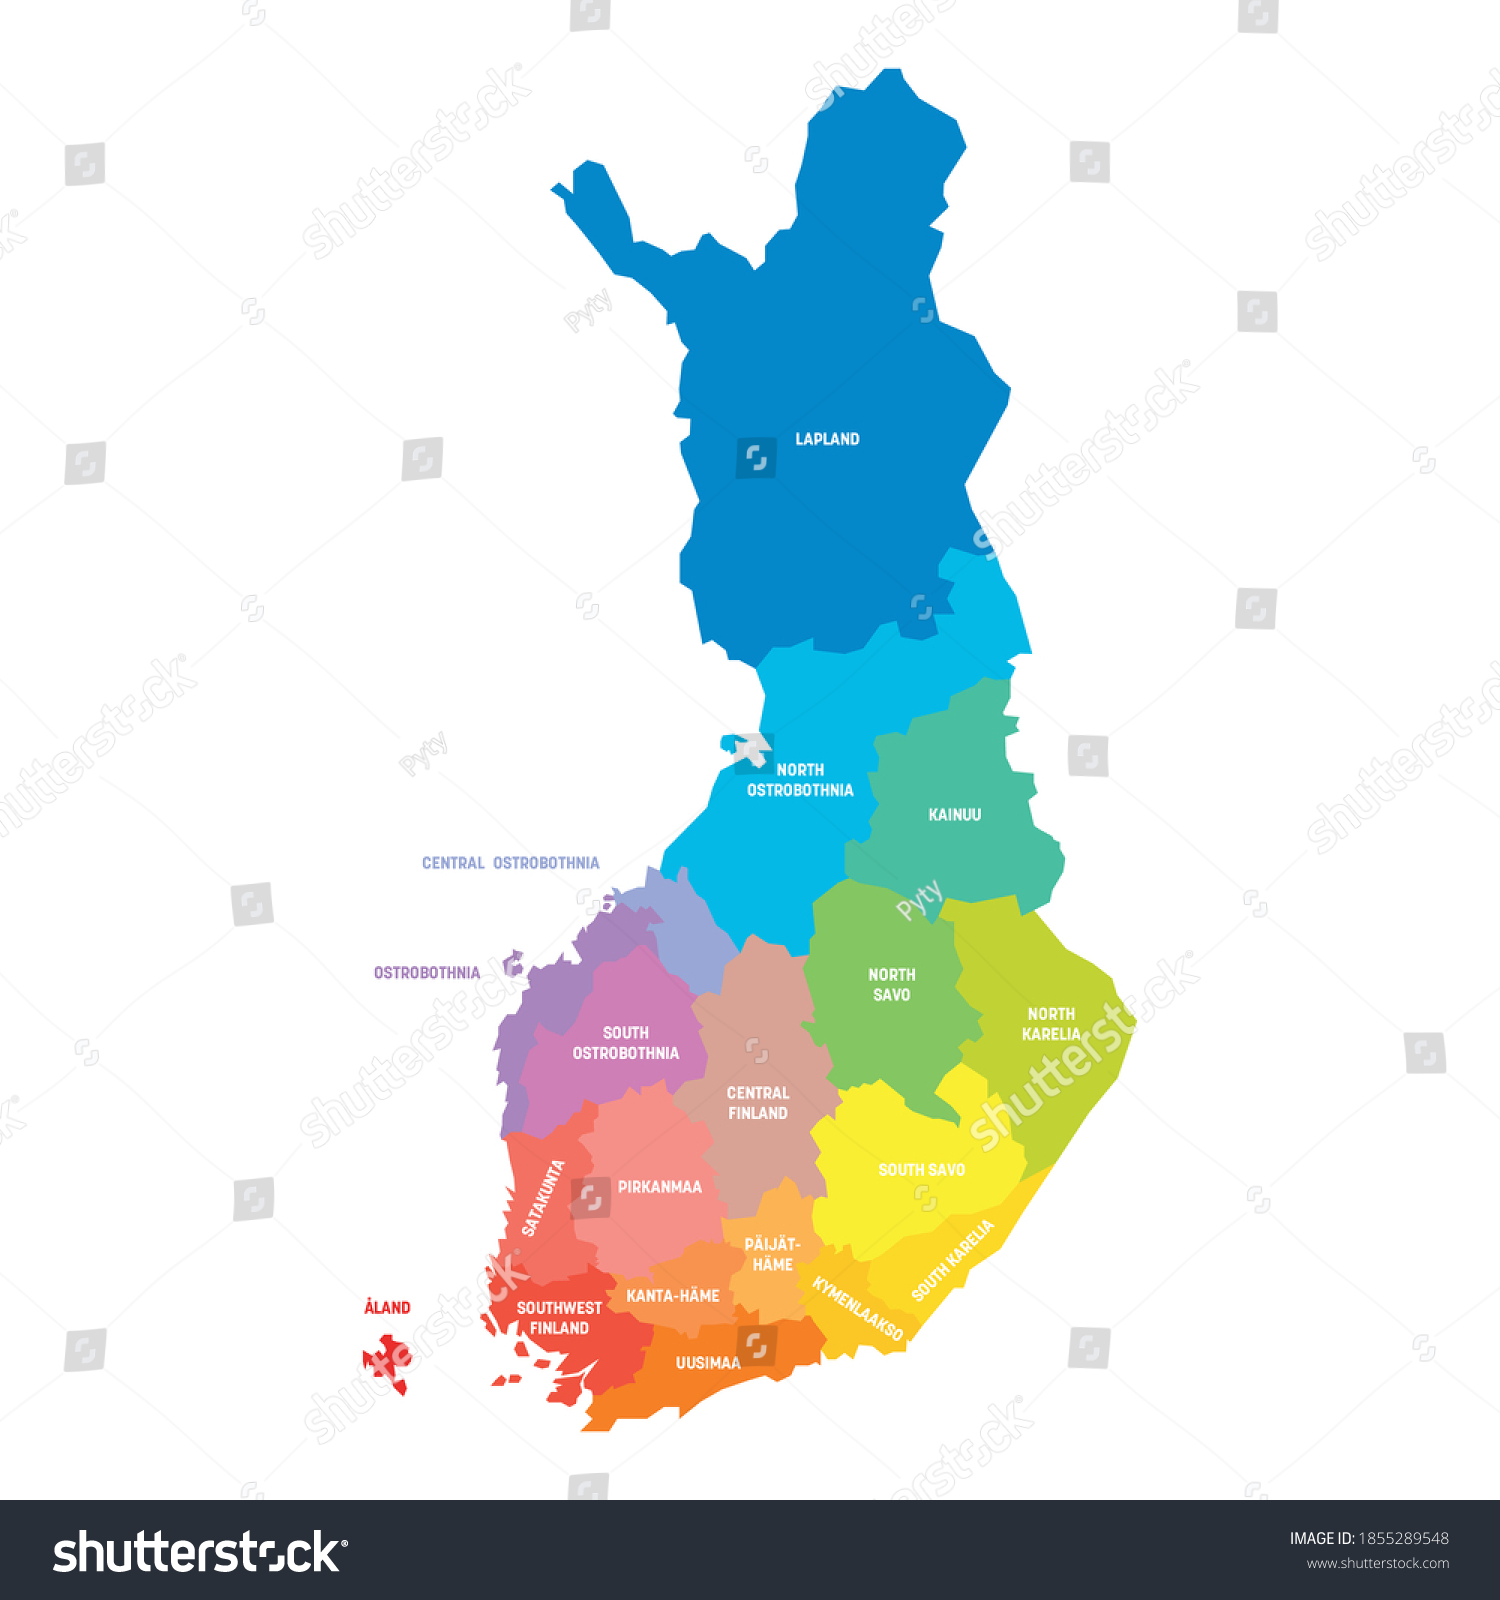 Colorful political map of Finland. Administrative divisions - regions. Simple flat vector map with labels. #1855289548